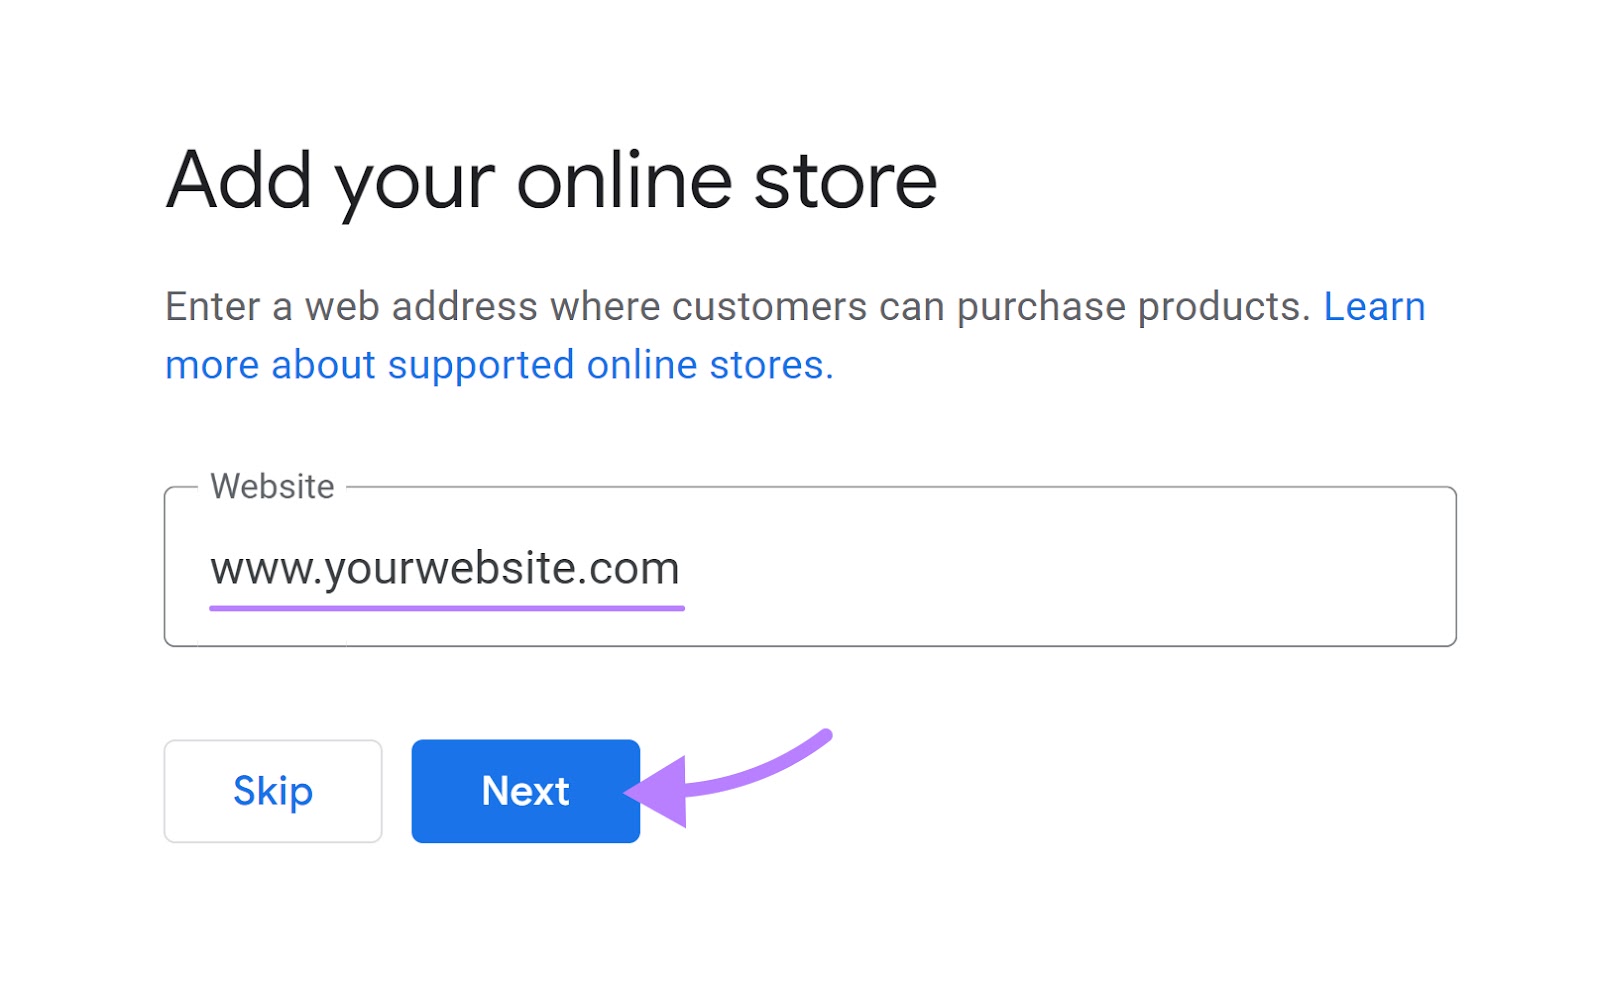 "Add your online store" window